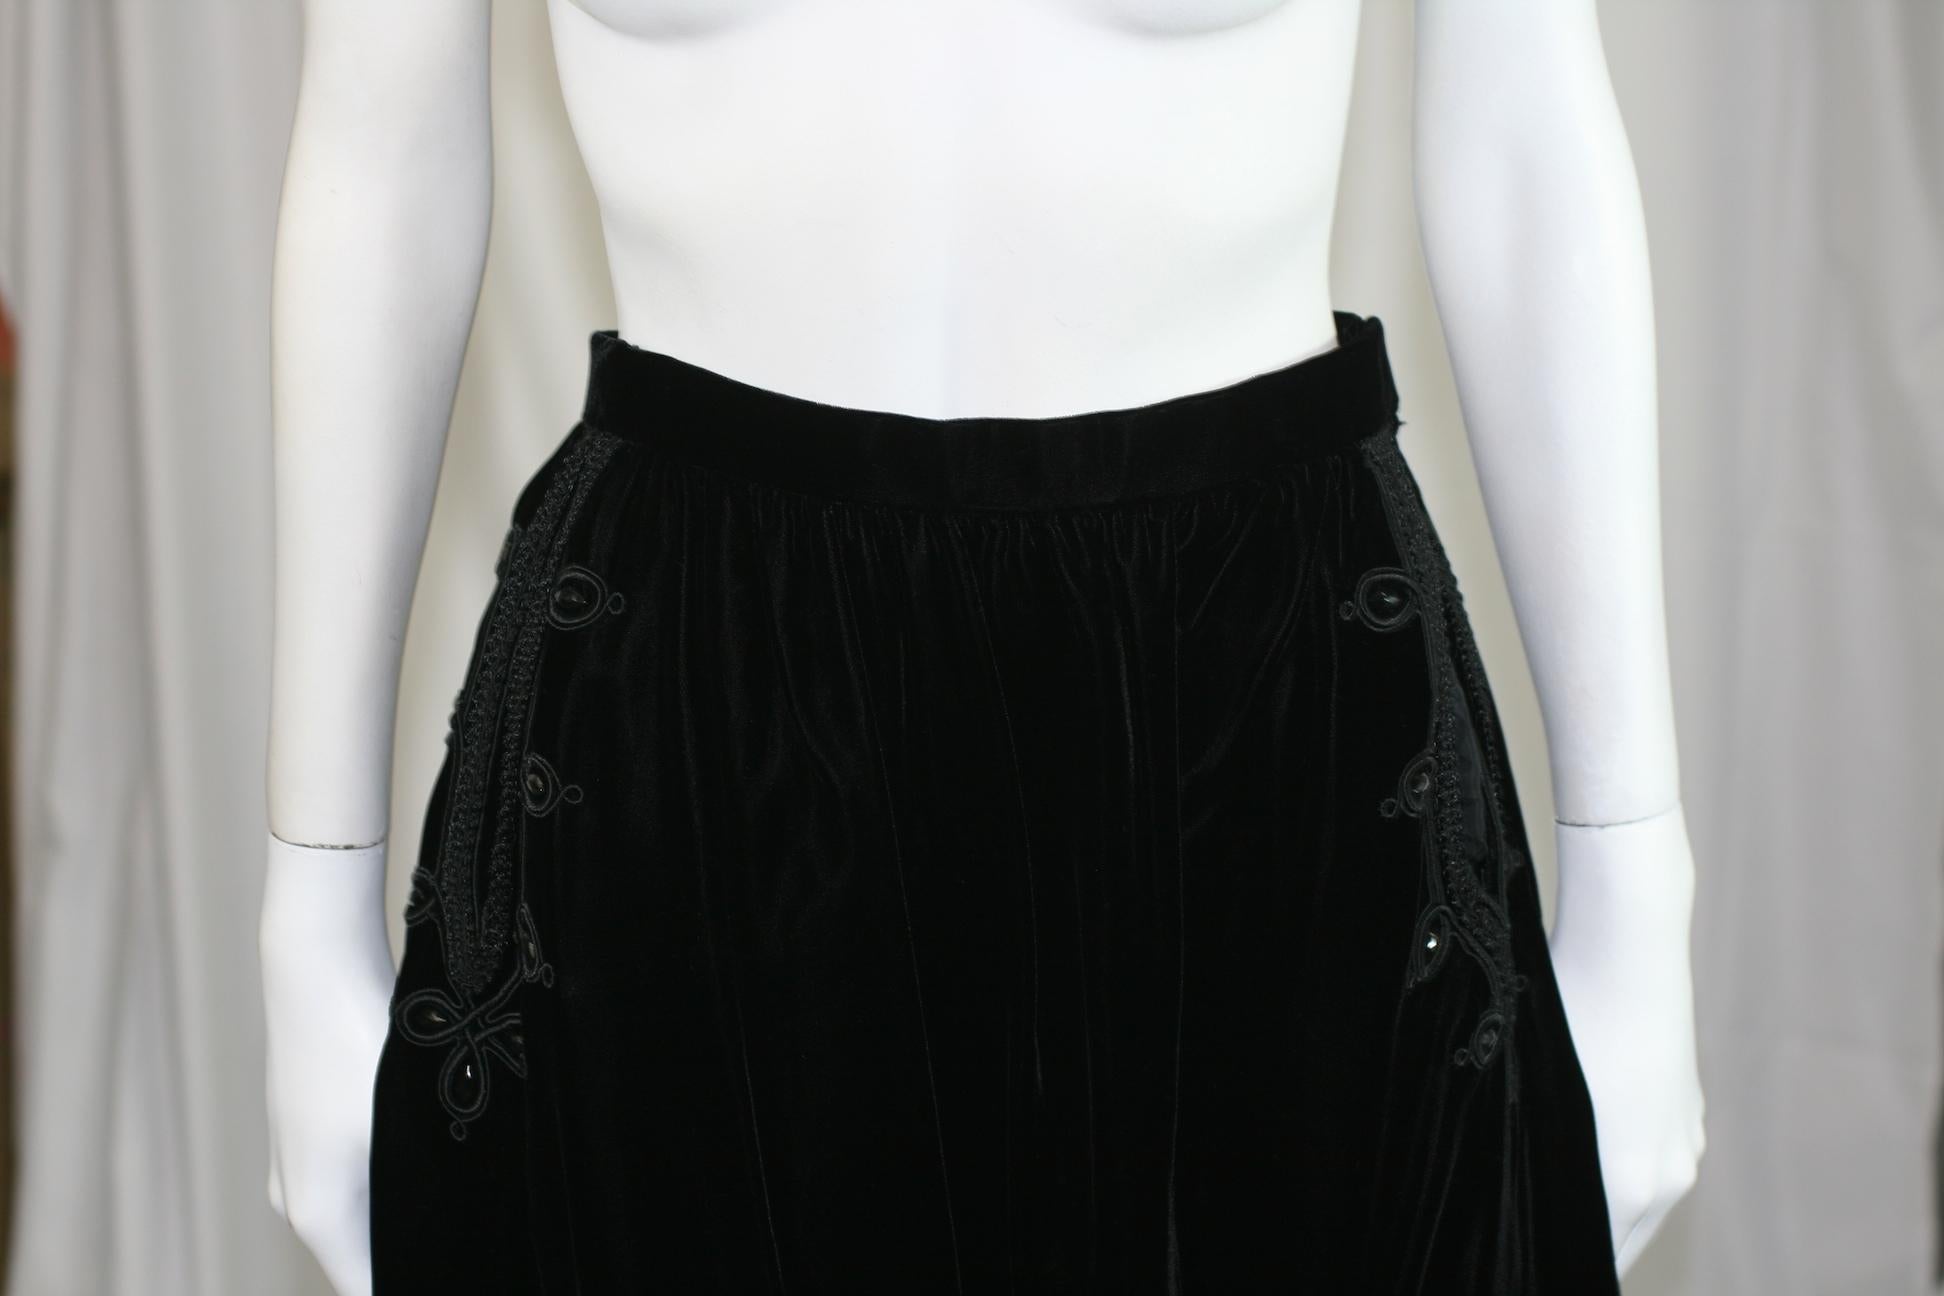 Oscar de la Renta Ink Black Hussar Style Velvet Skirt with passementerie braid trim and jet beading along slash pockets and hem, a timeless classic from Oscar de la Renta which can be worn in so many ways.
size 6 vintage. (vintage sizes run smaller